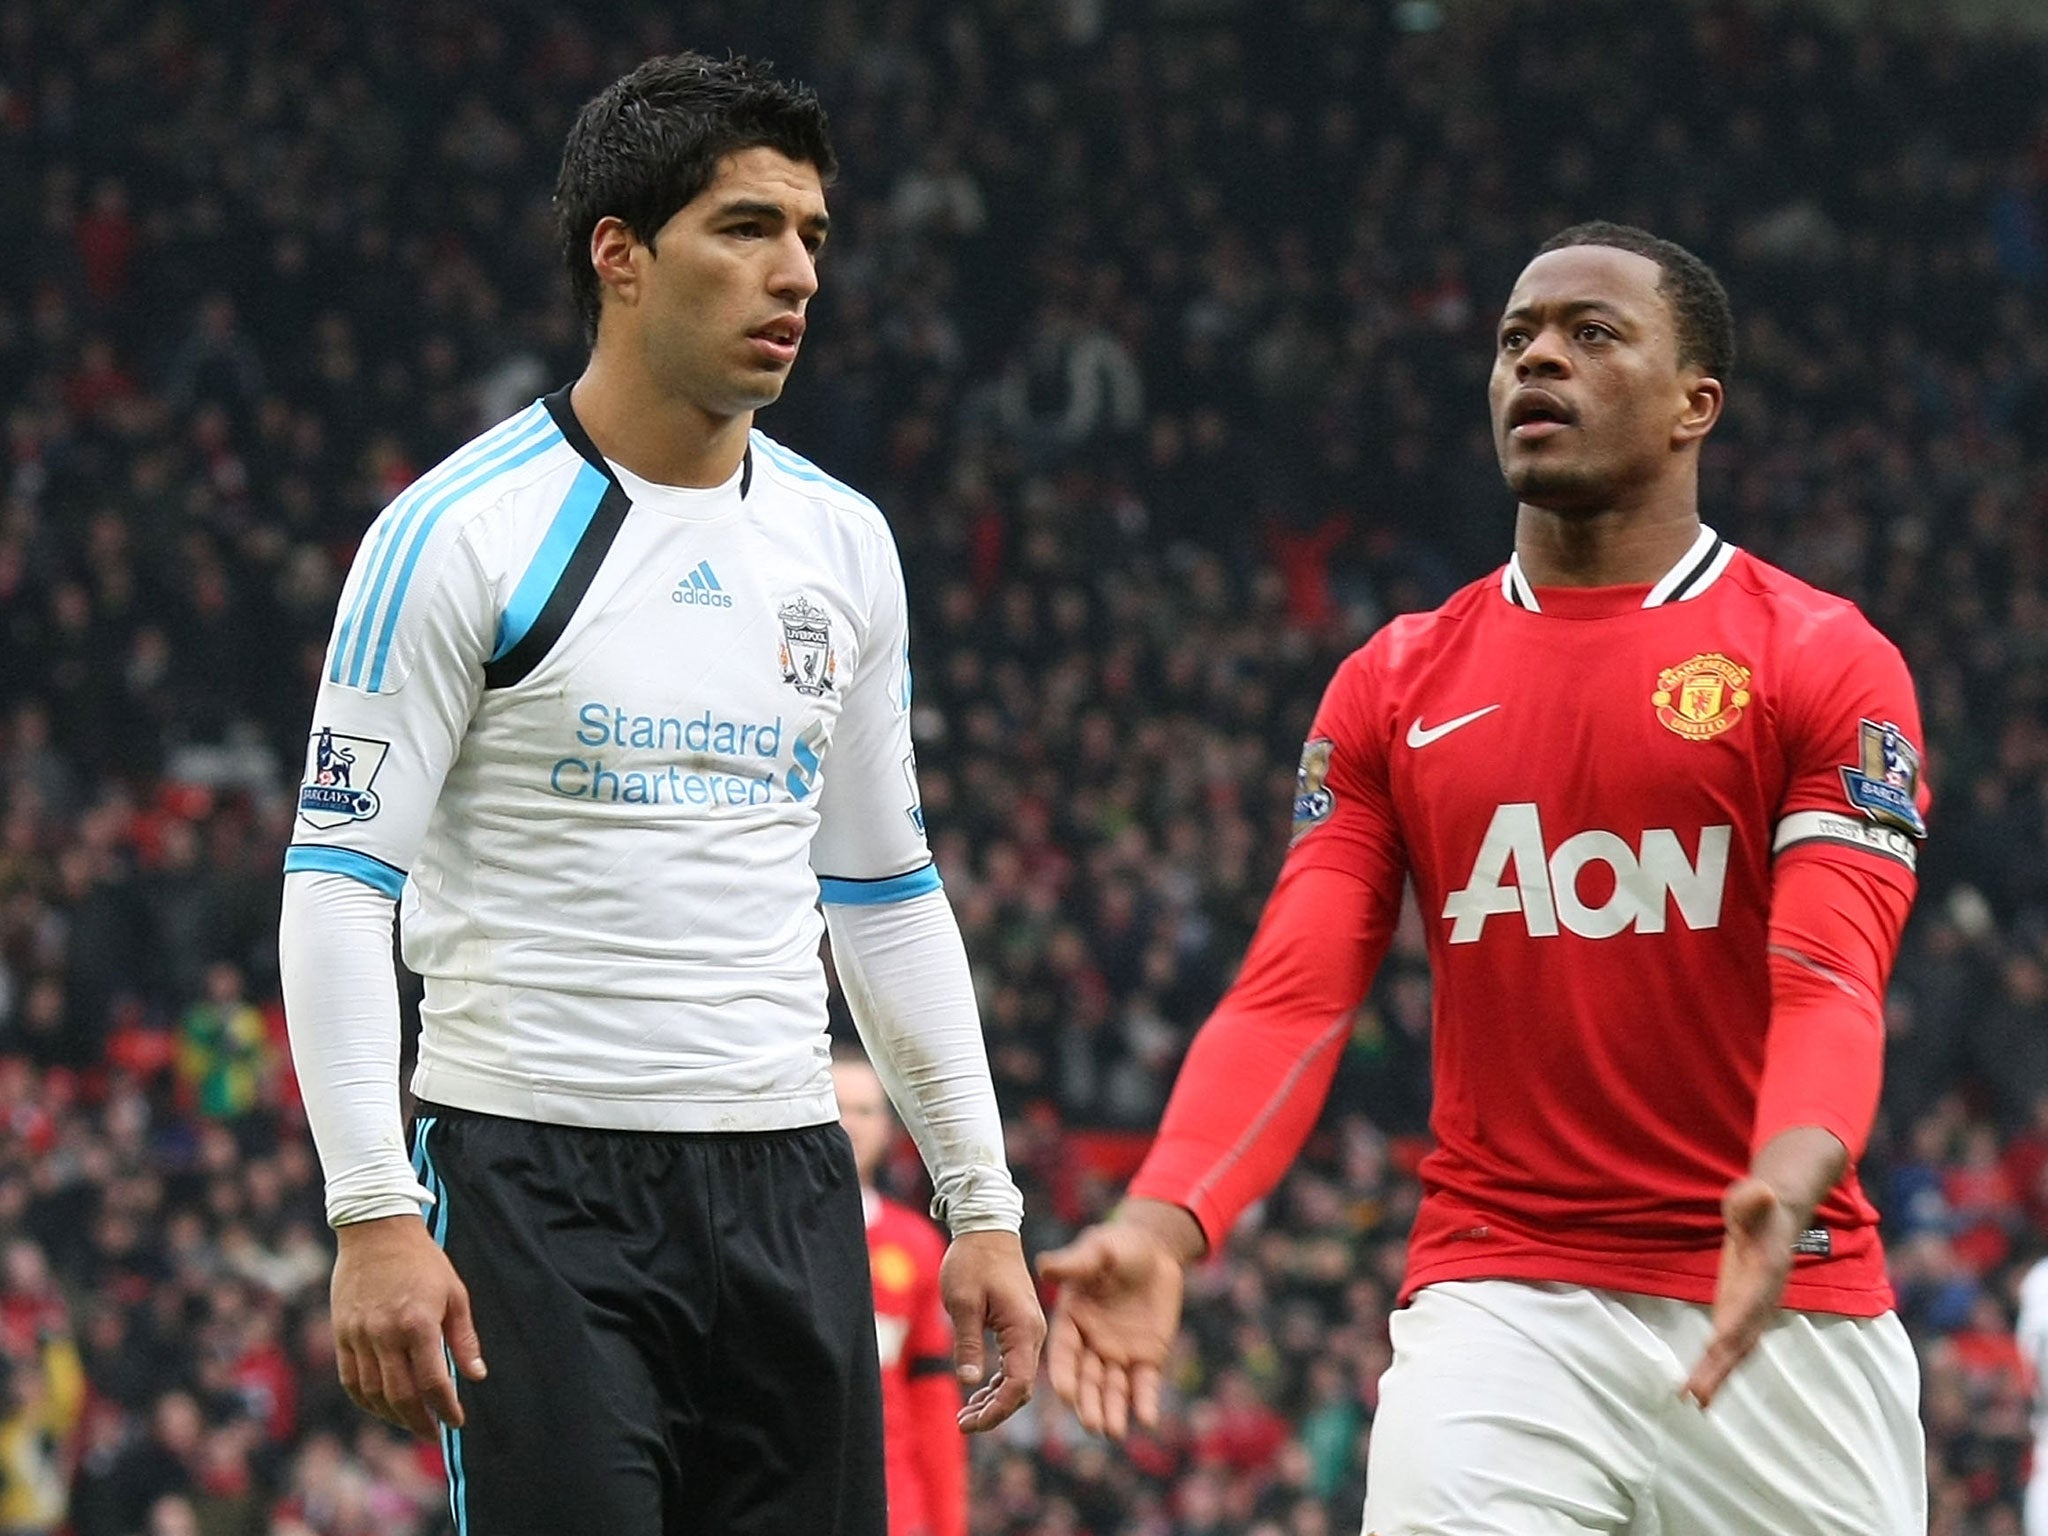 Luis Suarez has claimed that the racism allegations Patrice Evra made against him in 2011 were 'all false'